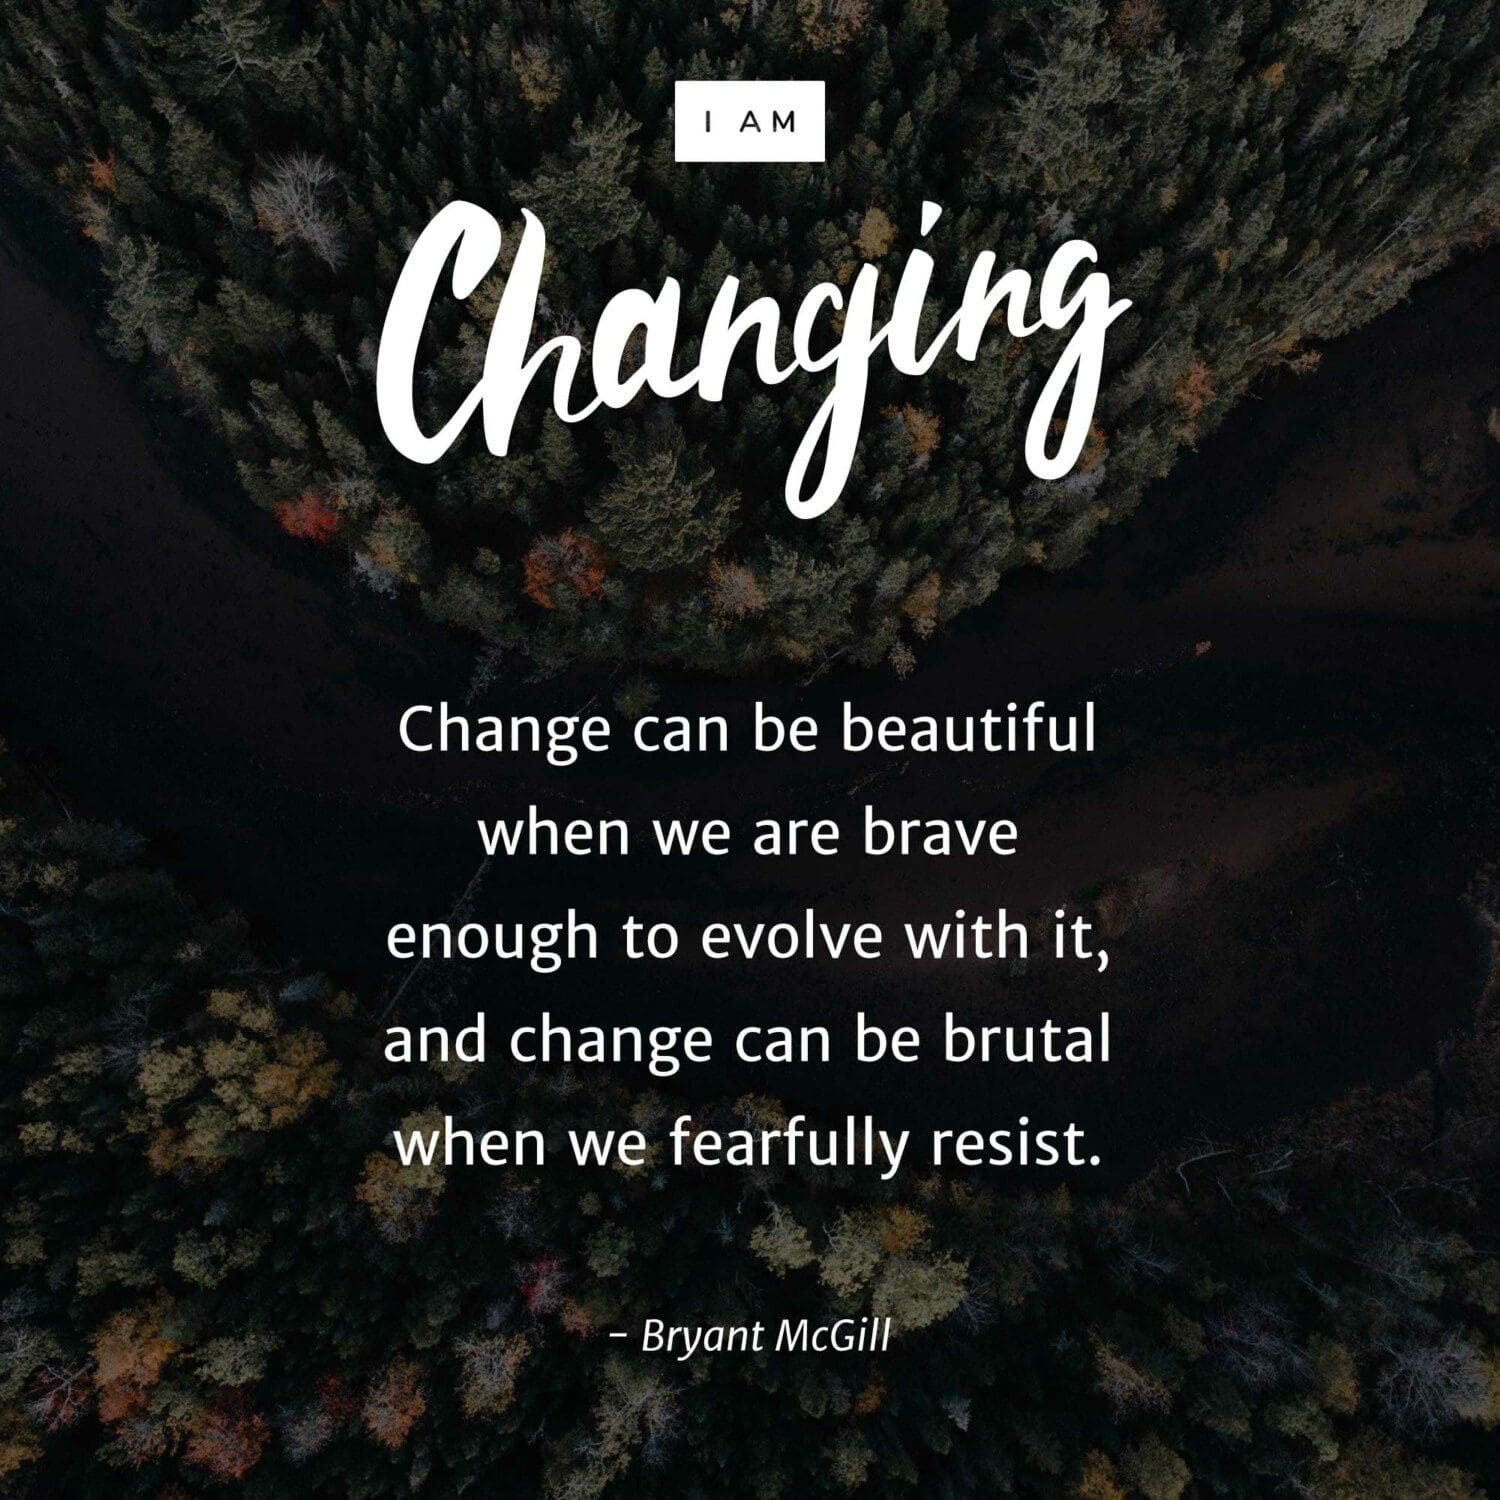 "Change can be beautiful when we are brave enough to evolve with it, and change can be brutal when we fearfully resist." – Bryant McGill